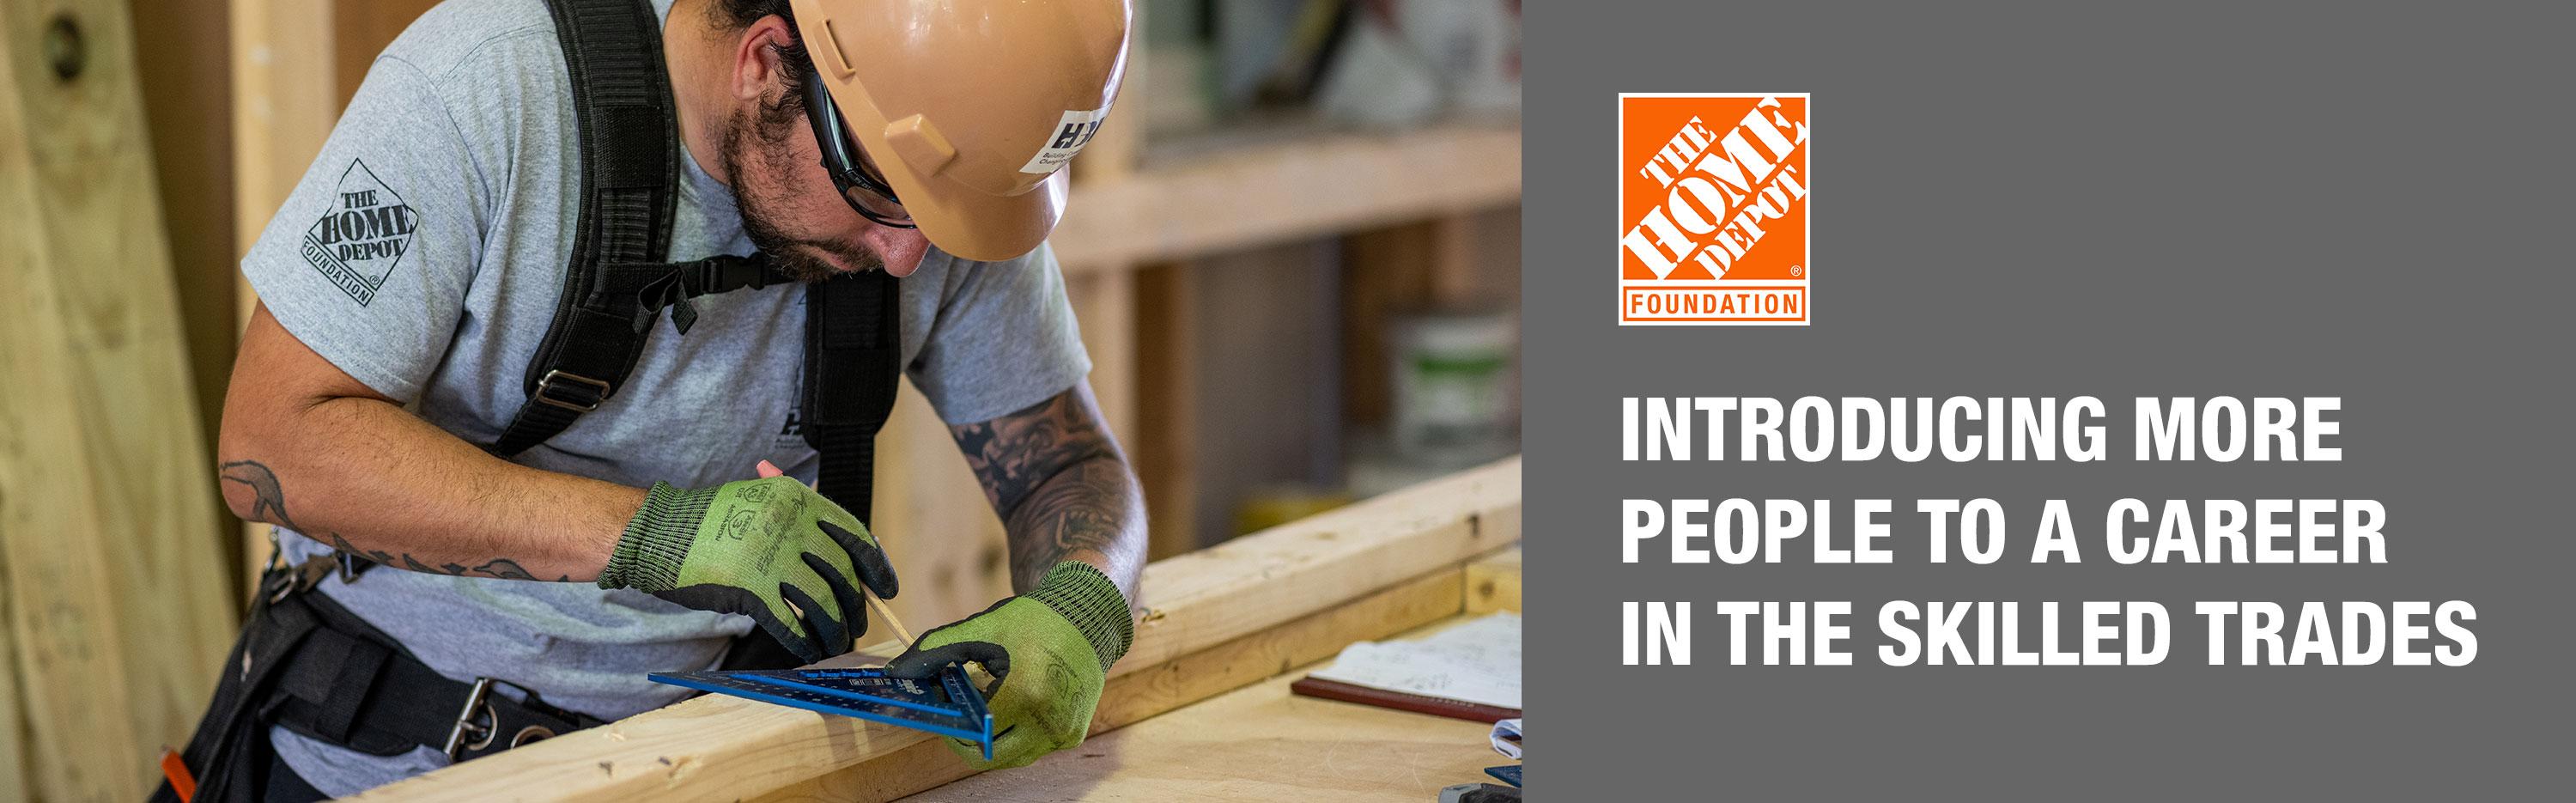 The Home Depot Foundation Skilled Trades Training